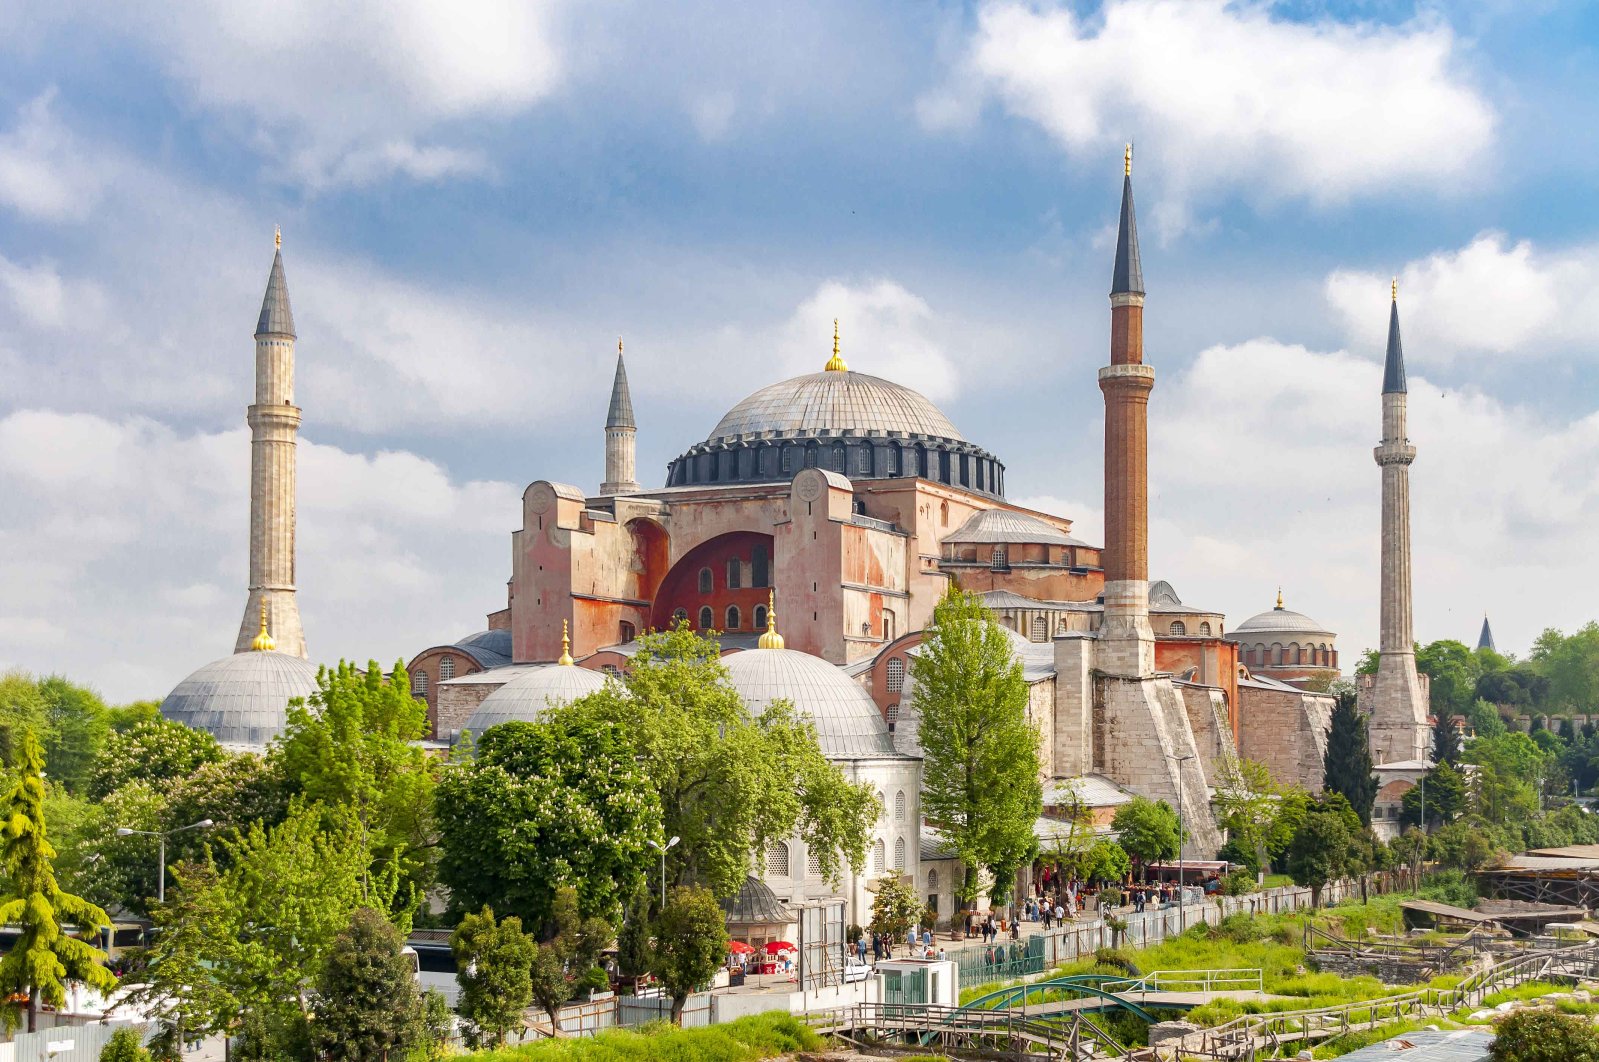 Hagia Sophia is one of the world's most important historical and cultural heritage sites. (iStock Photo)